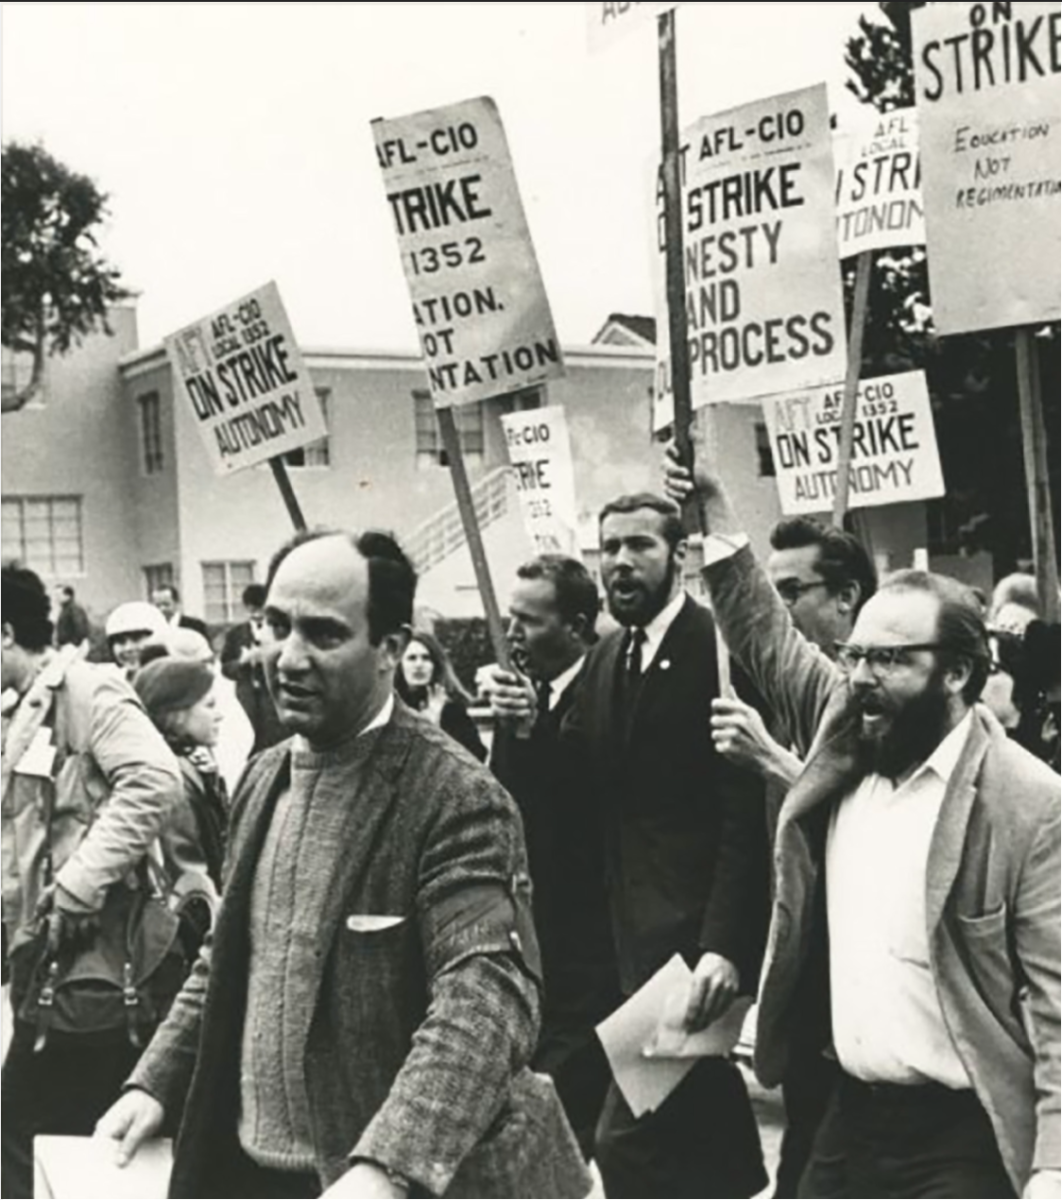 The American Federation of Teachers marches with picket signs during the ethnic studies strike of 1968. (Terry Schmitt/Courtesy of University Archives)